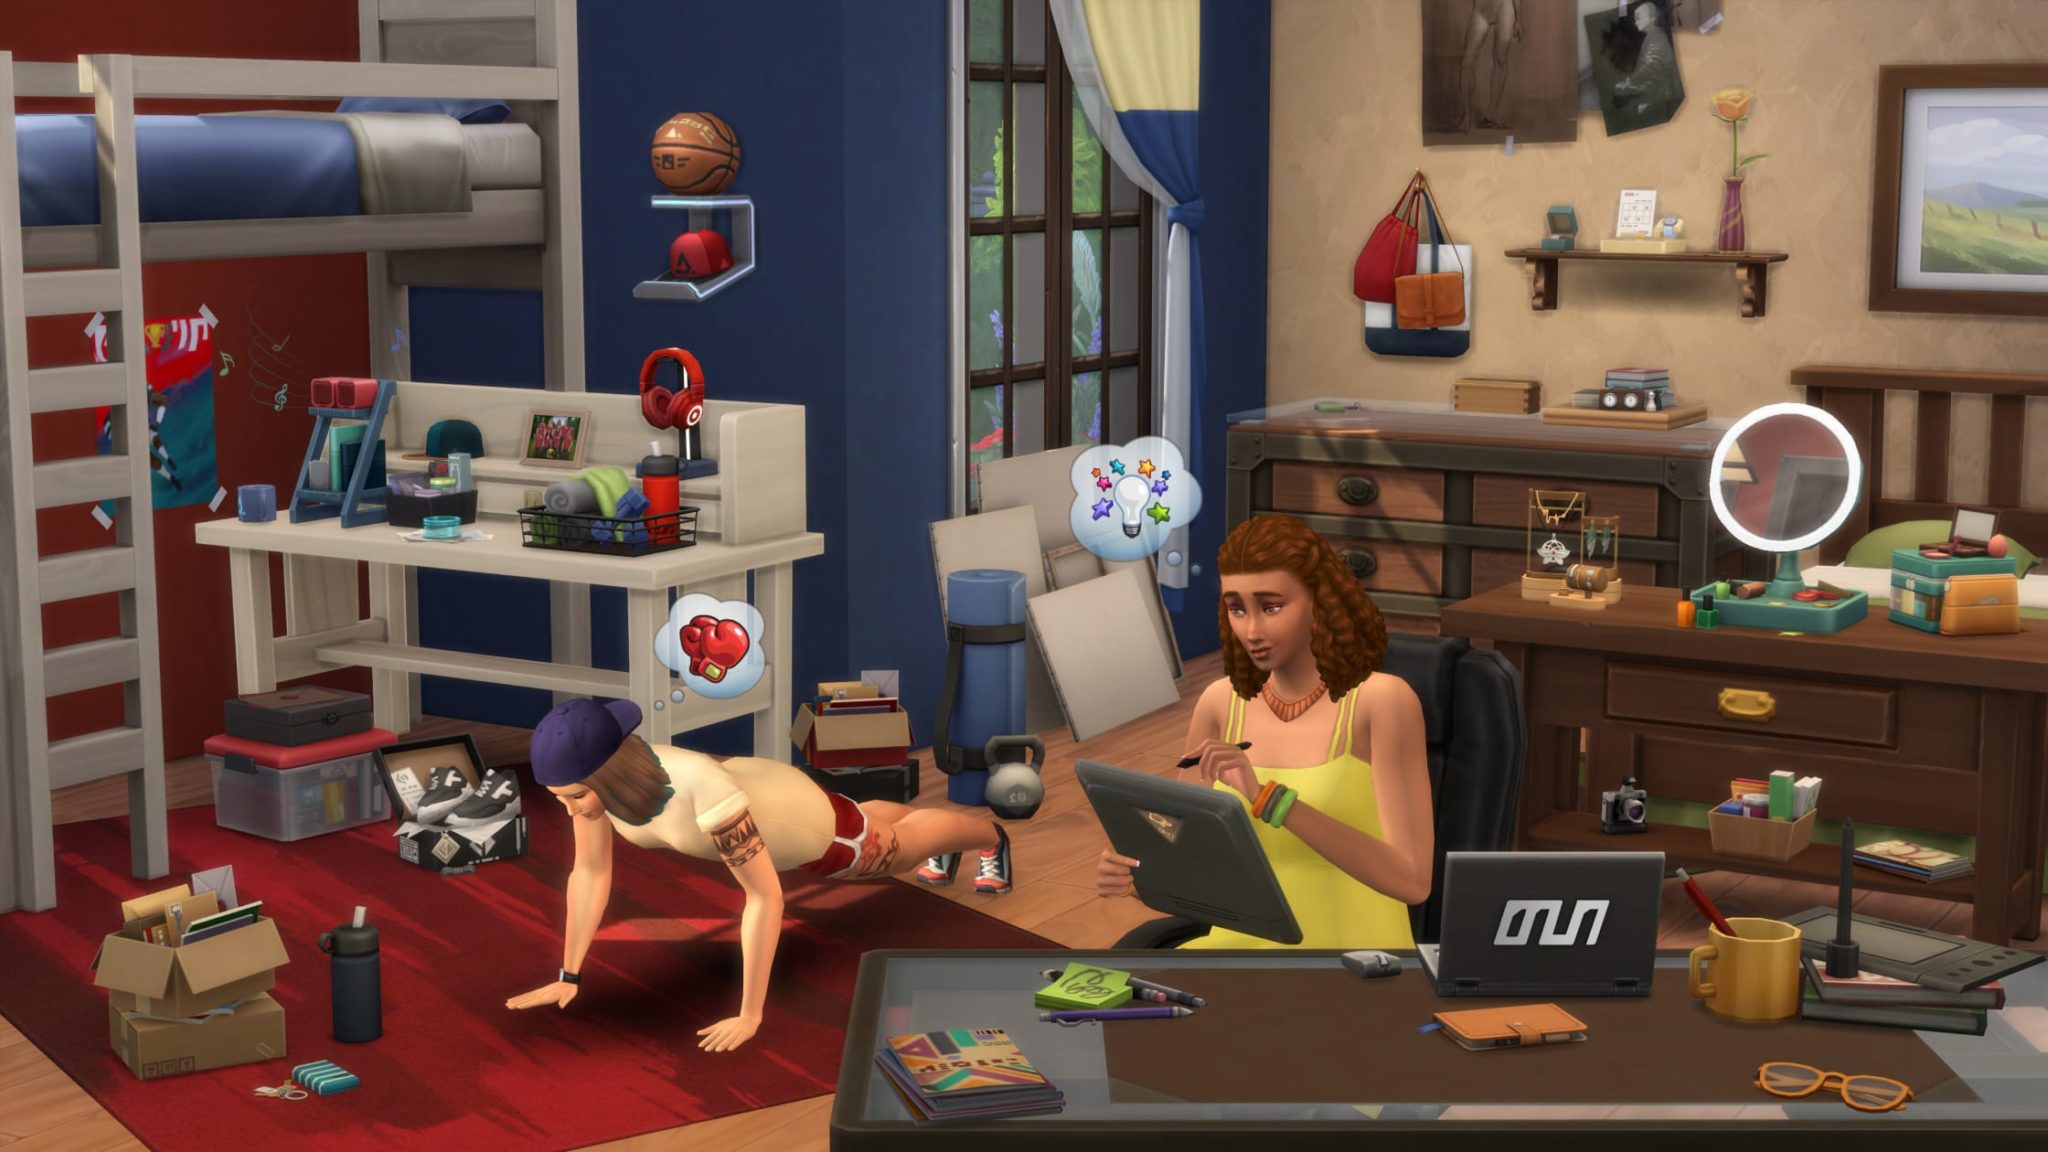 The Sims 4 Update 1.92.145.1030 - October 11, 2022 - The Sim Architect